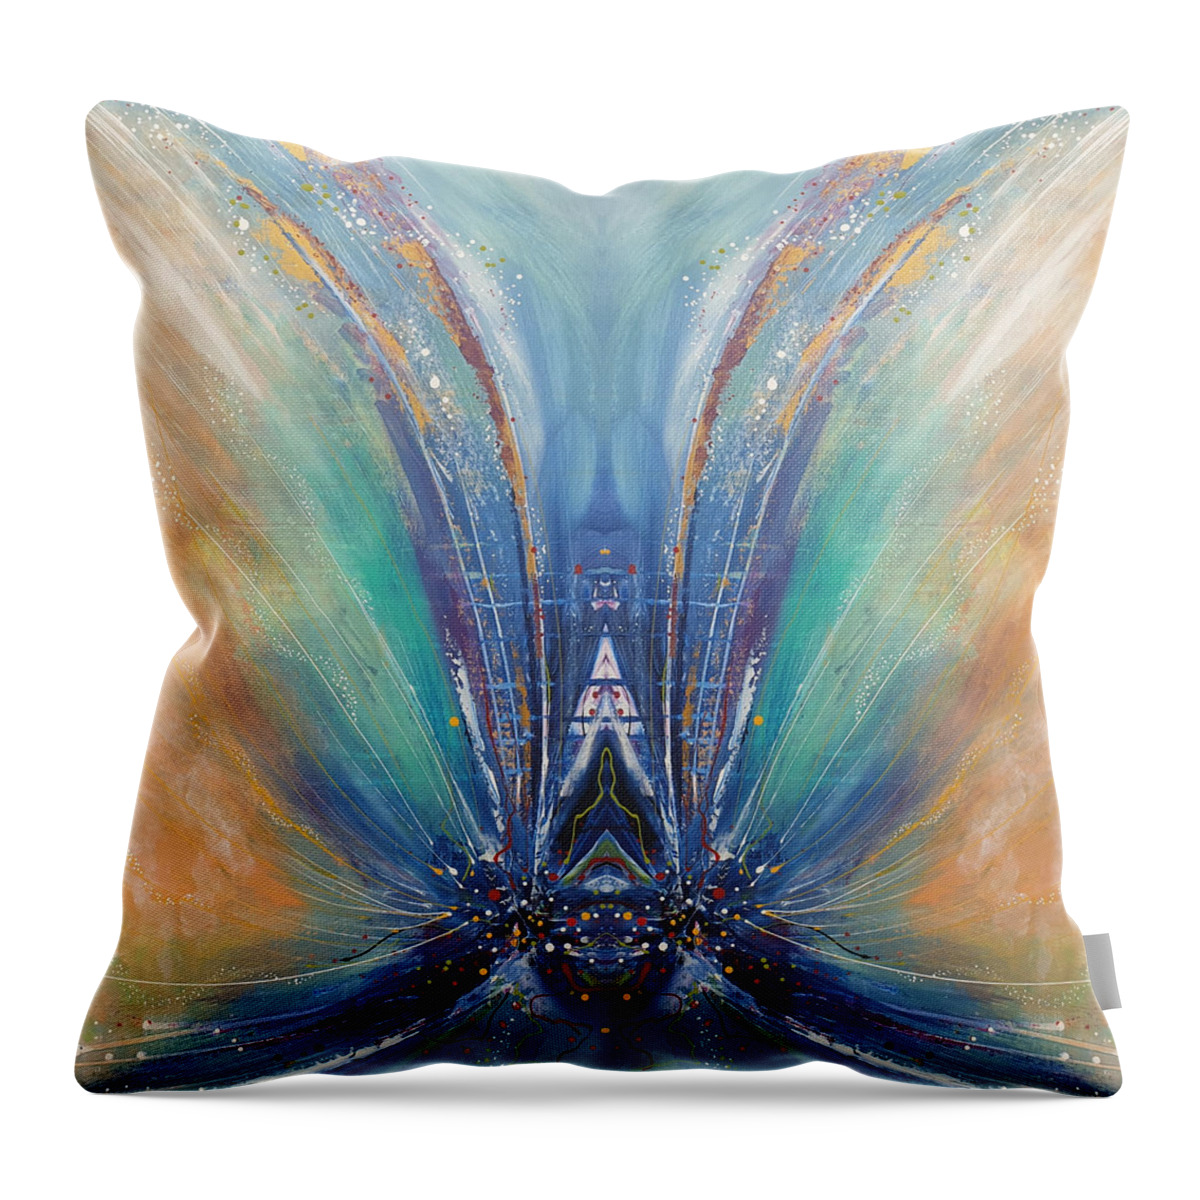 Drop Throw Pillow featuring the digital art New Year - Mirror by Themayart